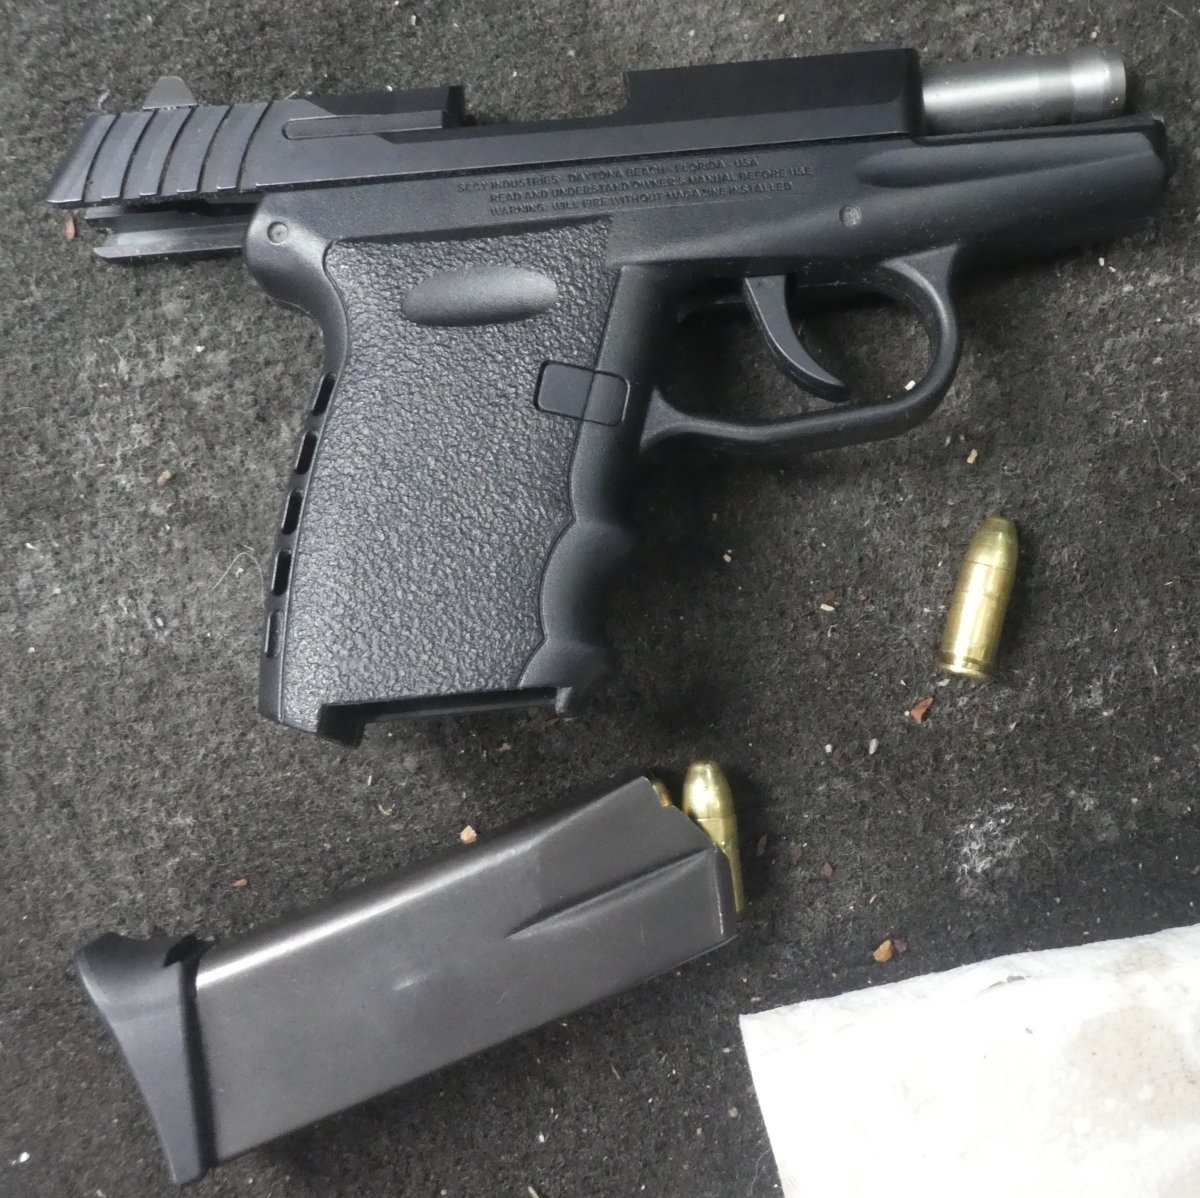 OPP say officers seized this handgun along with drugs following a traffic stop in Peterborough.